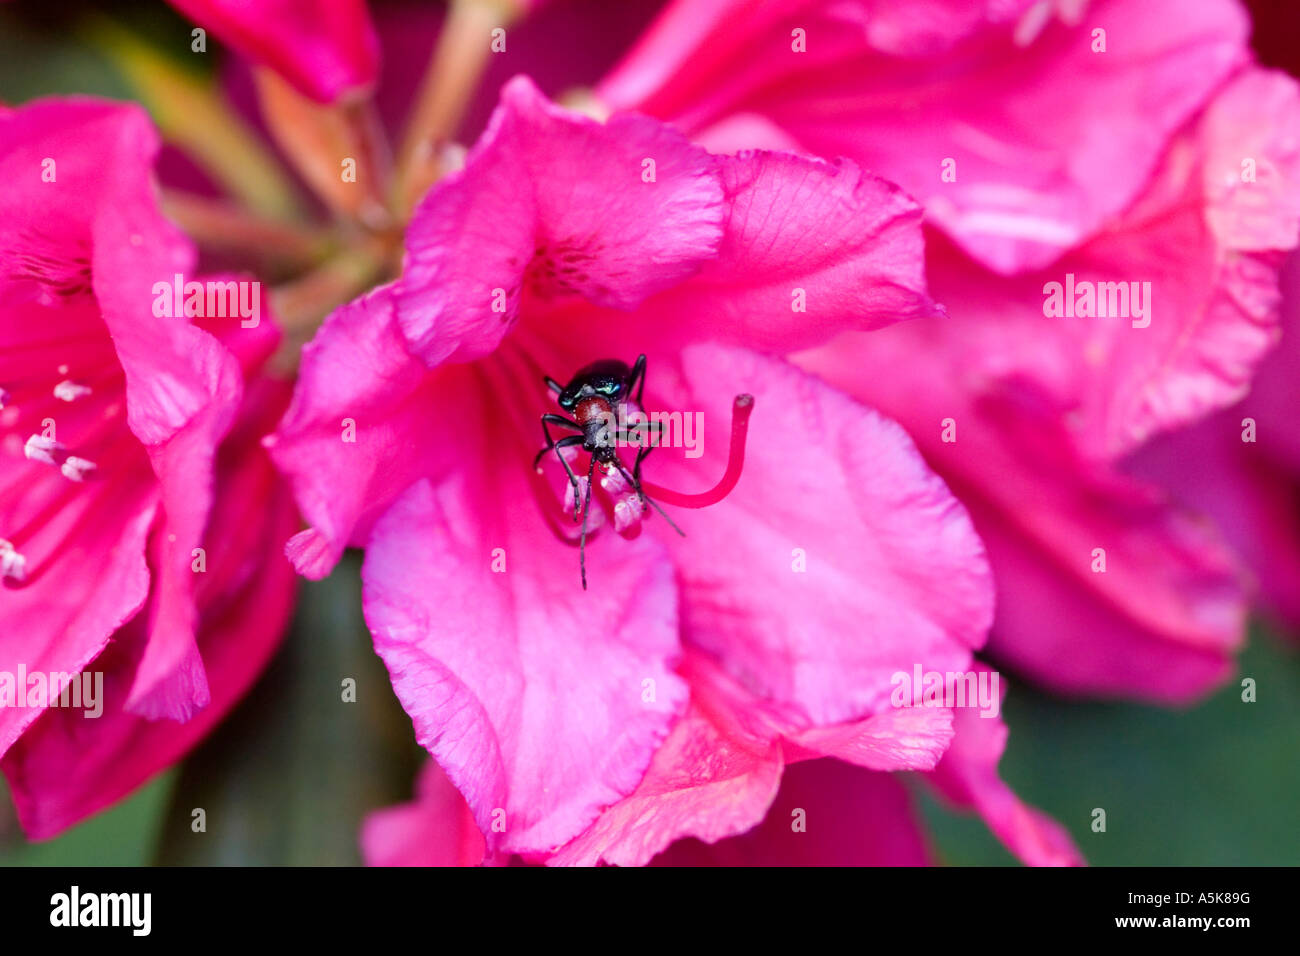 Rhododendron arboreum flower with beetle Coleoptera Stock Photo